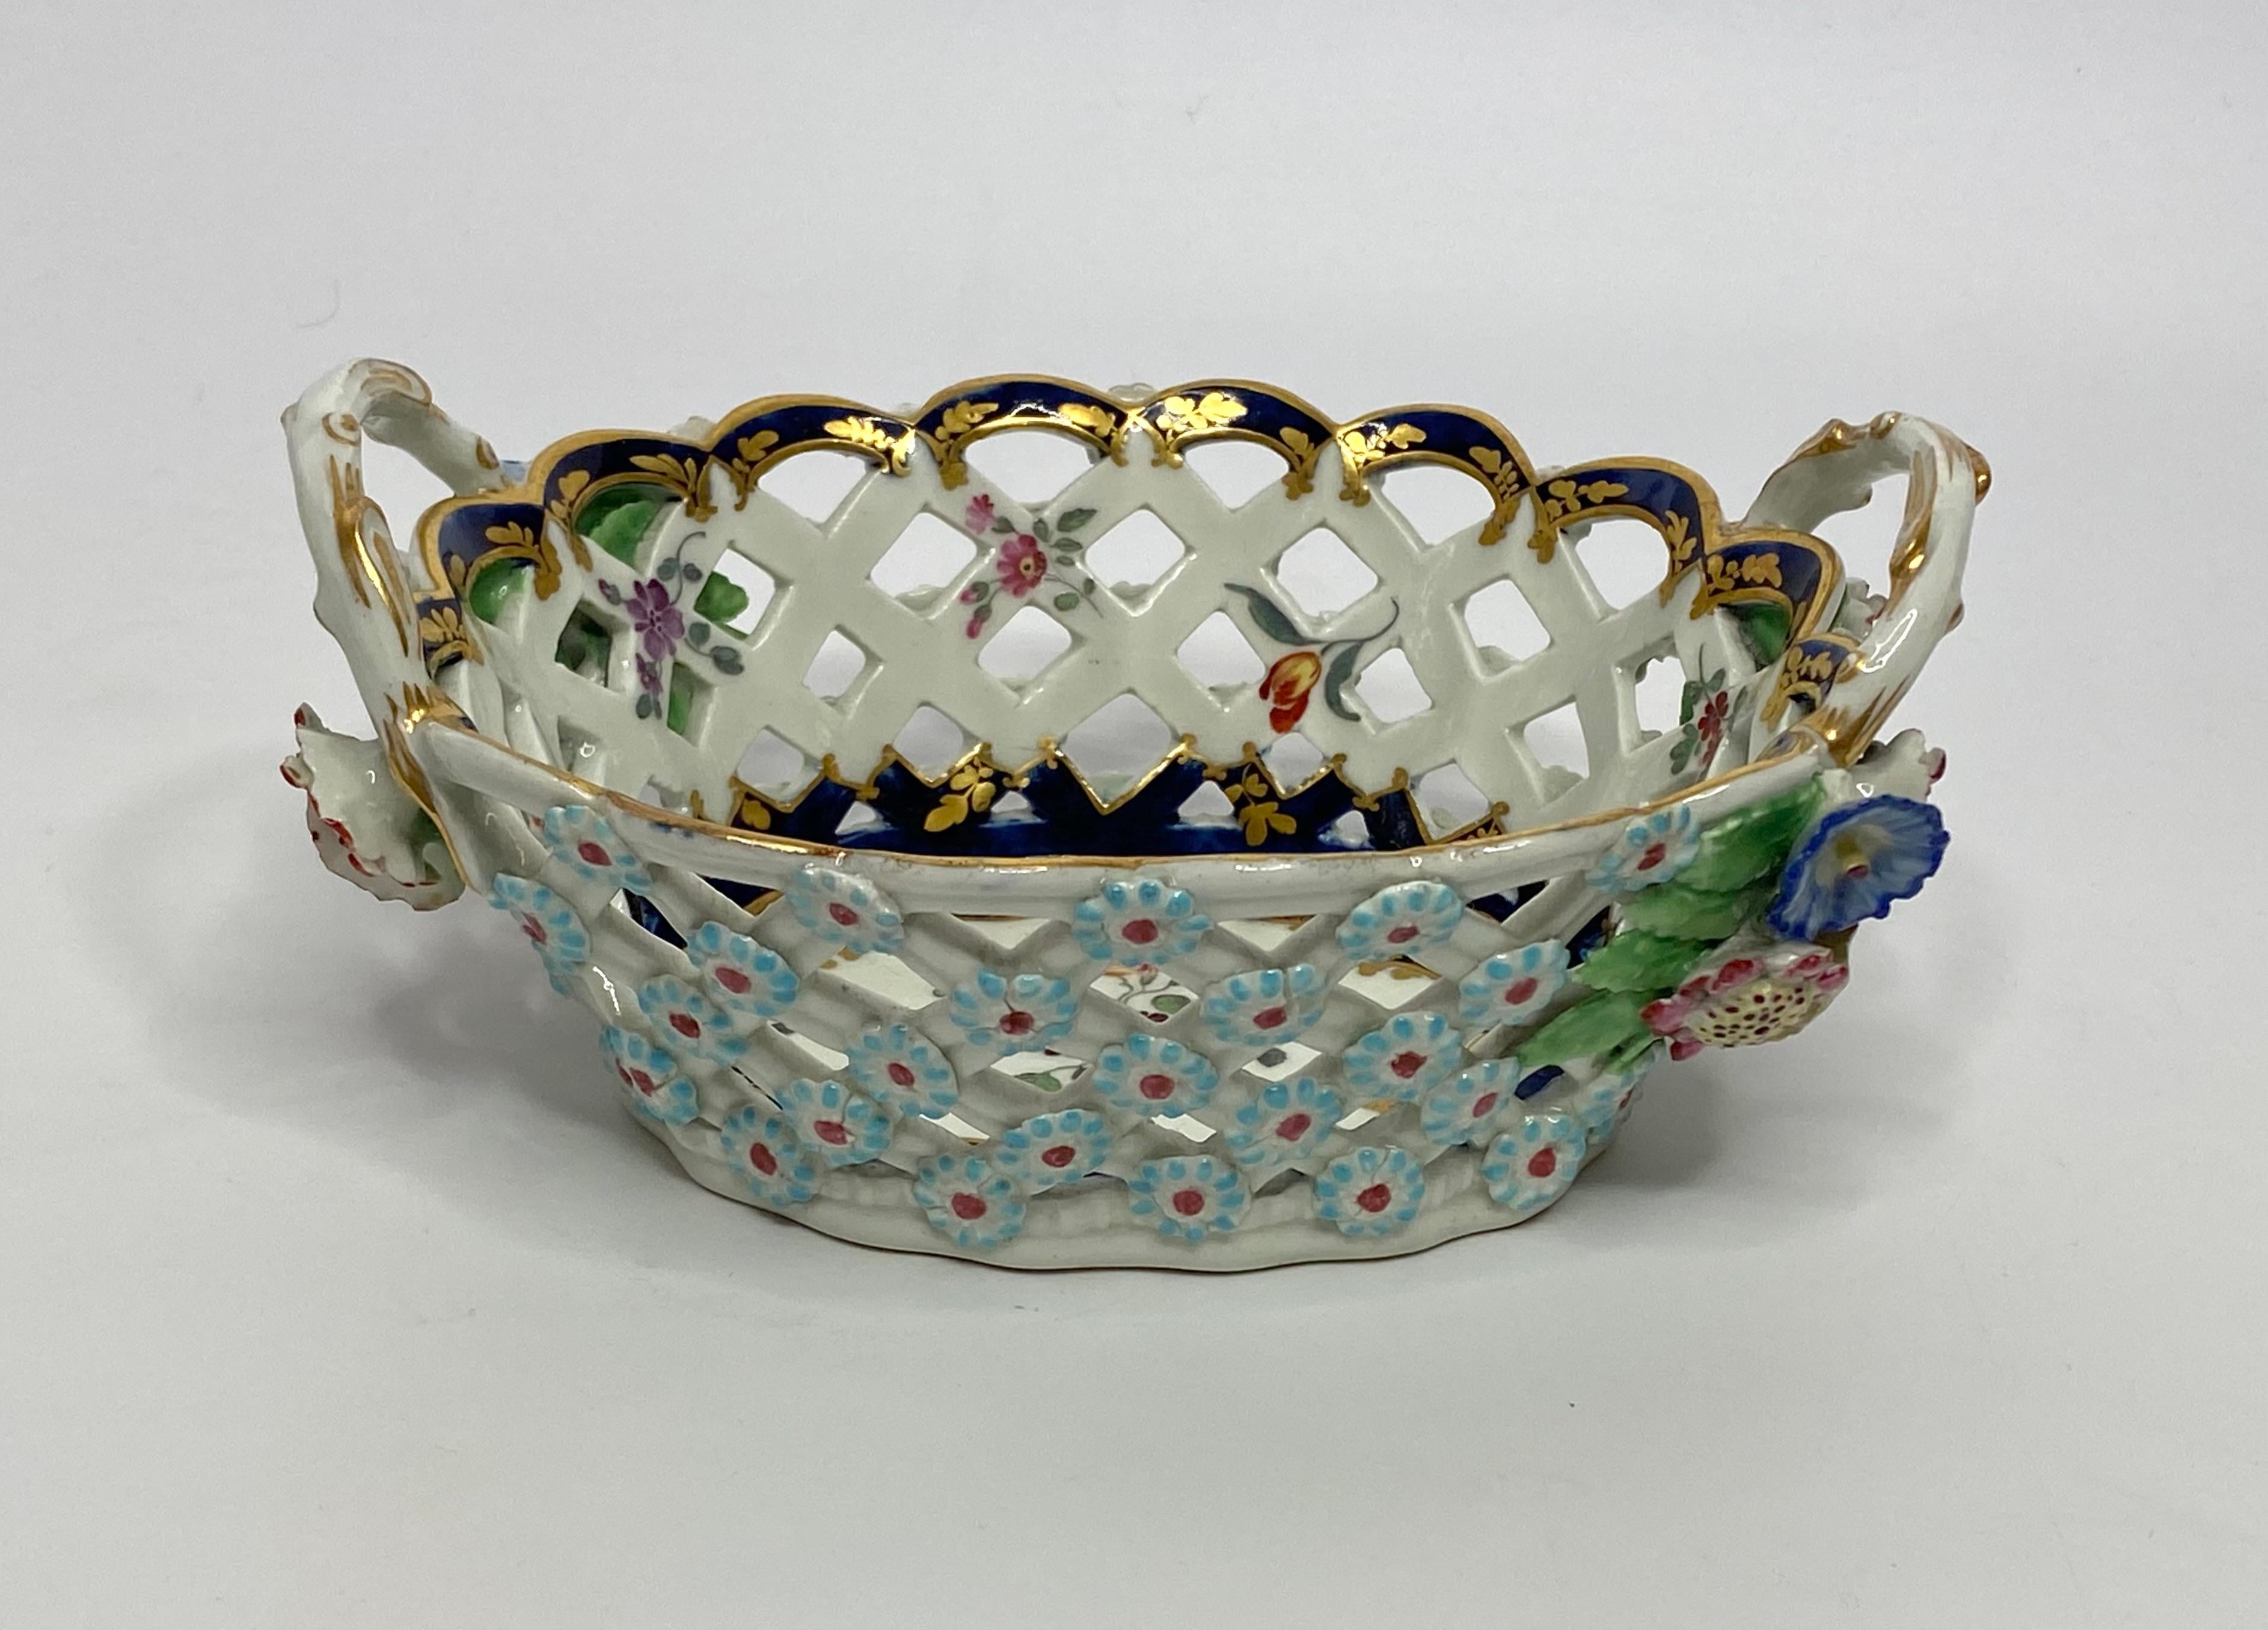 A fine and rare Worcester porcelain chestnut basket, c. 1770. Hand painted in the London workshop of James Giles, with a a spray of flowers, within an elaborate gilt scroll and flowered panel, on a underglaze blue scale ground. The lattice work,